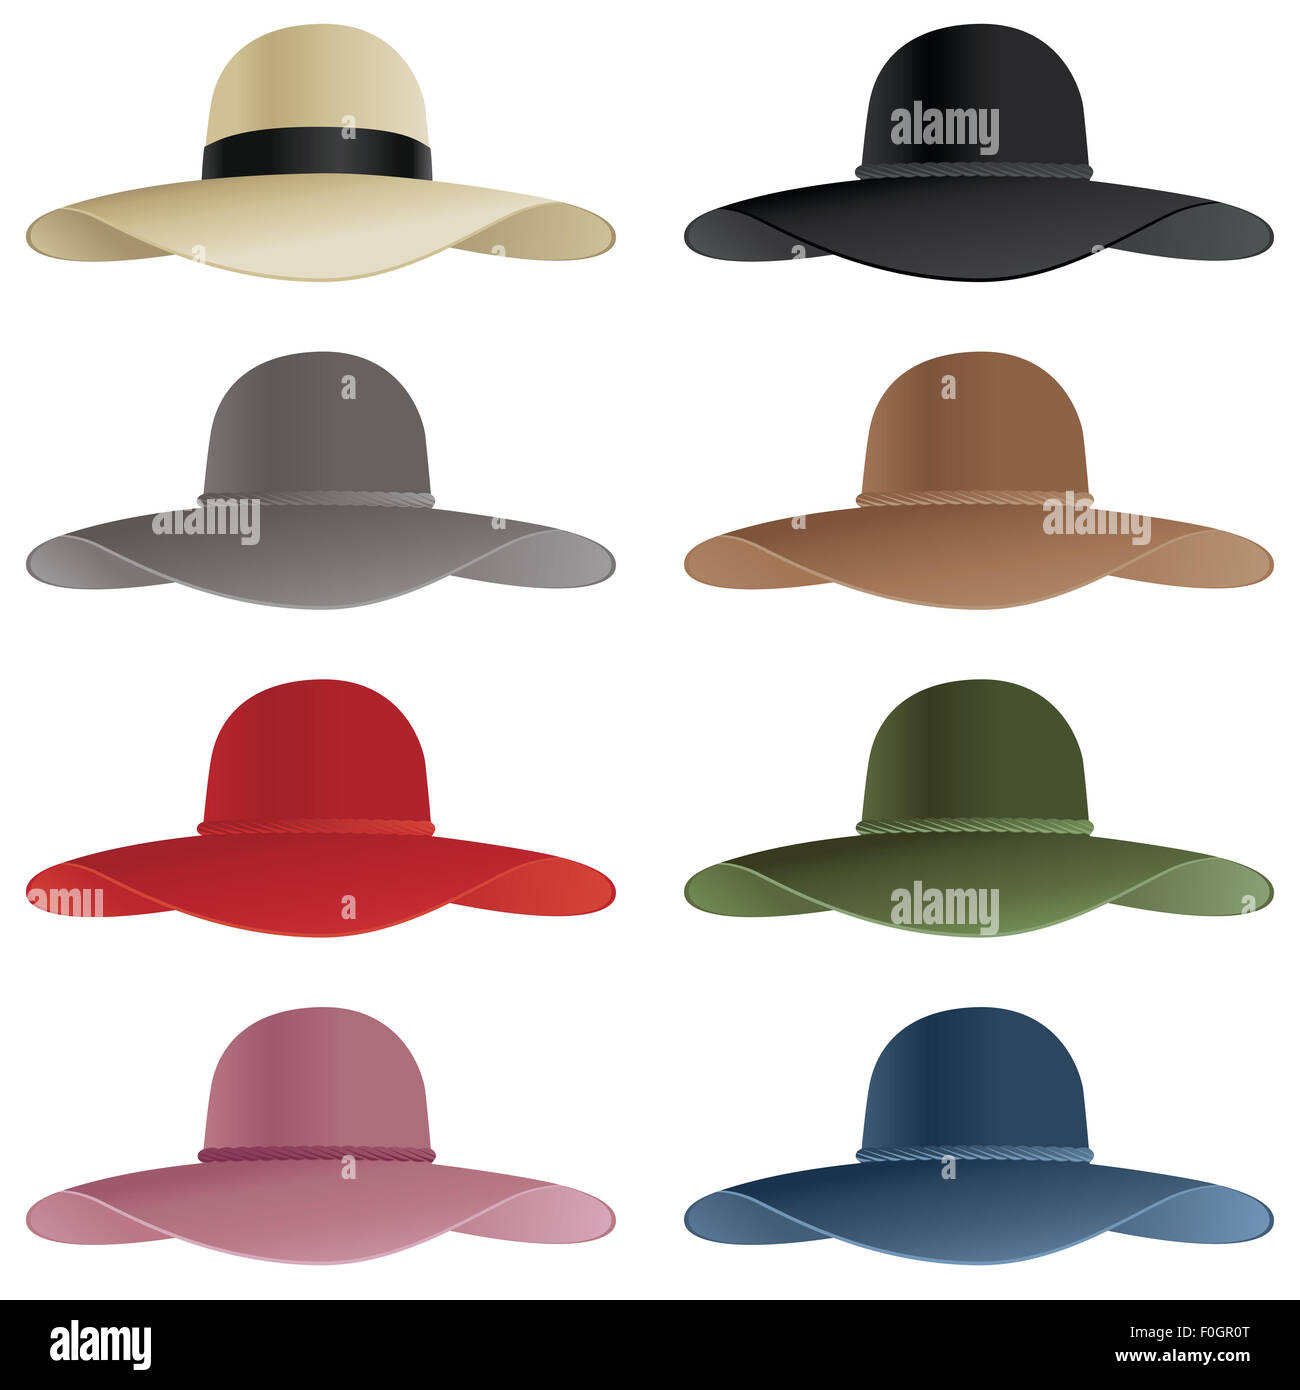 A selection of floppy hats in various colors. Stock Photo